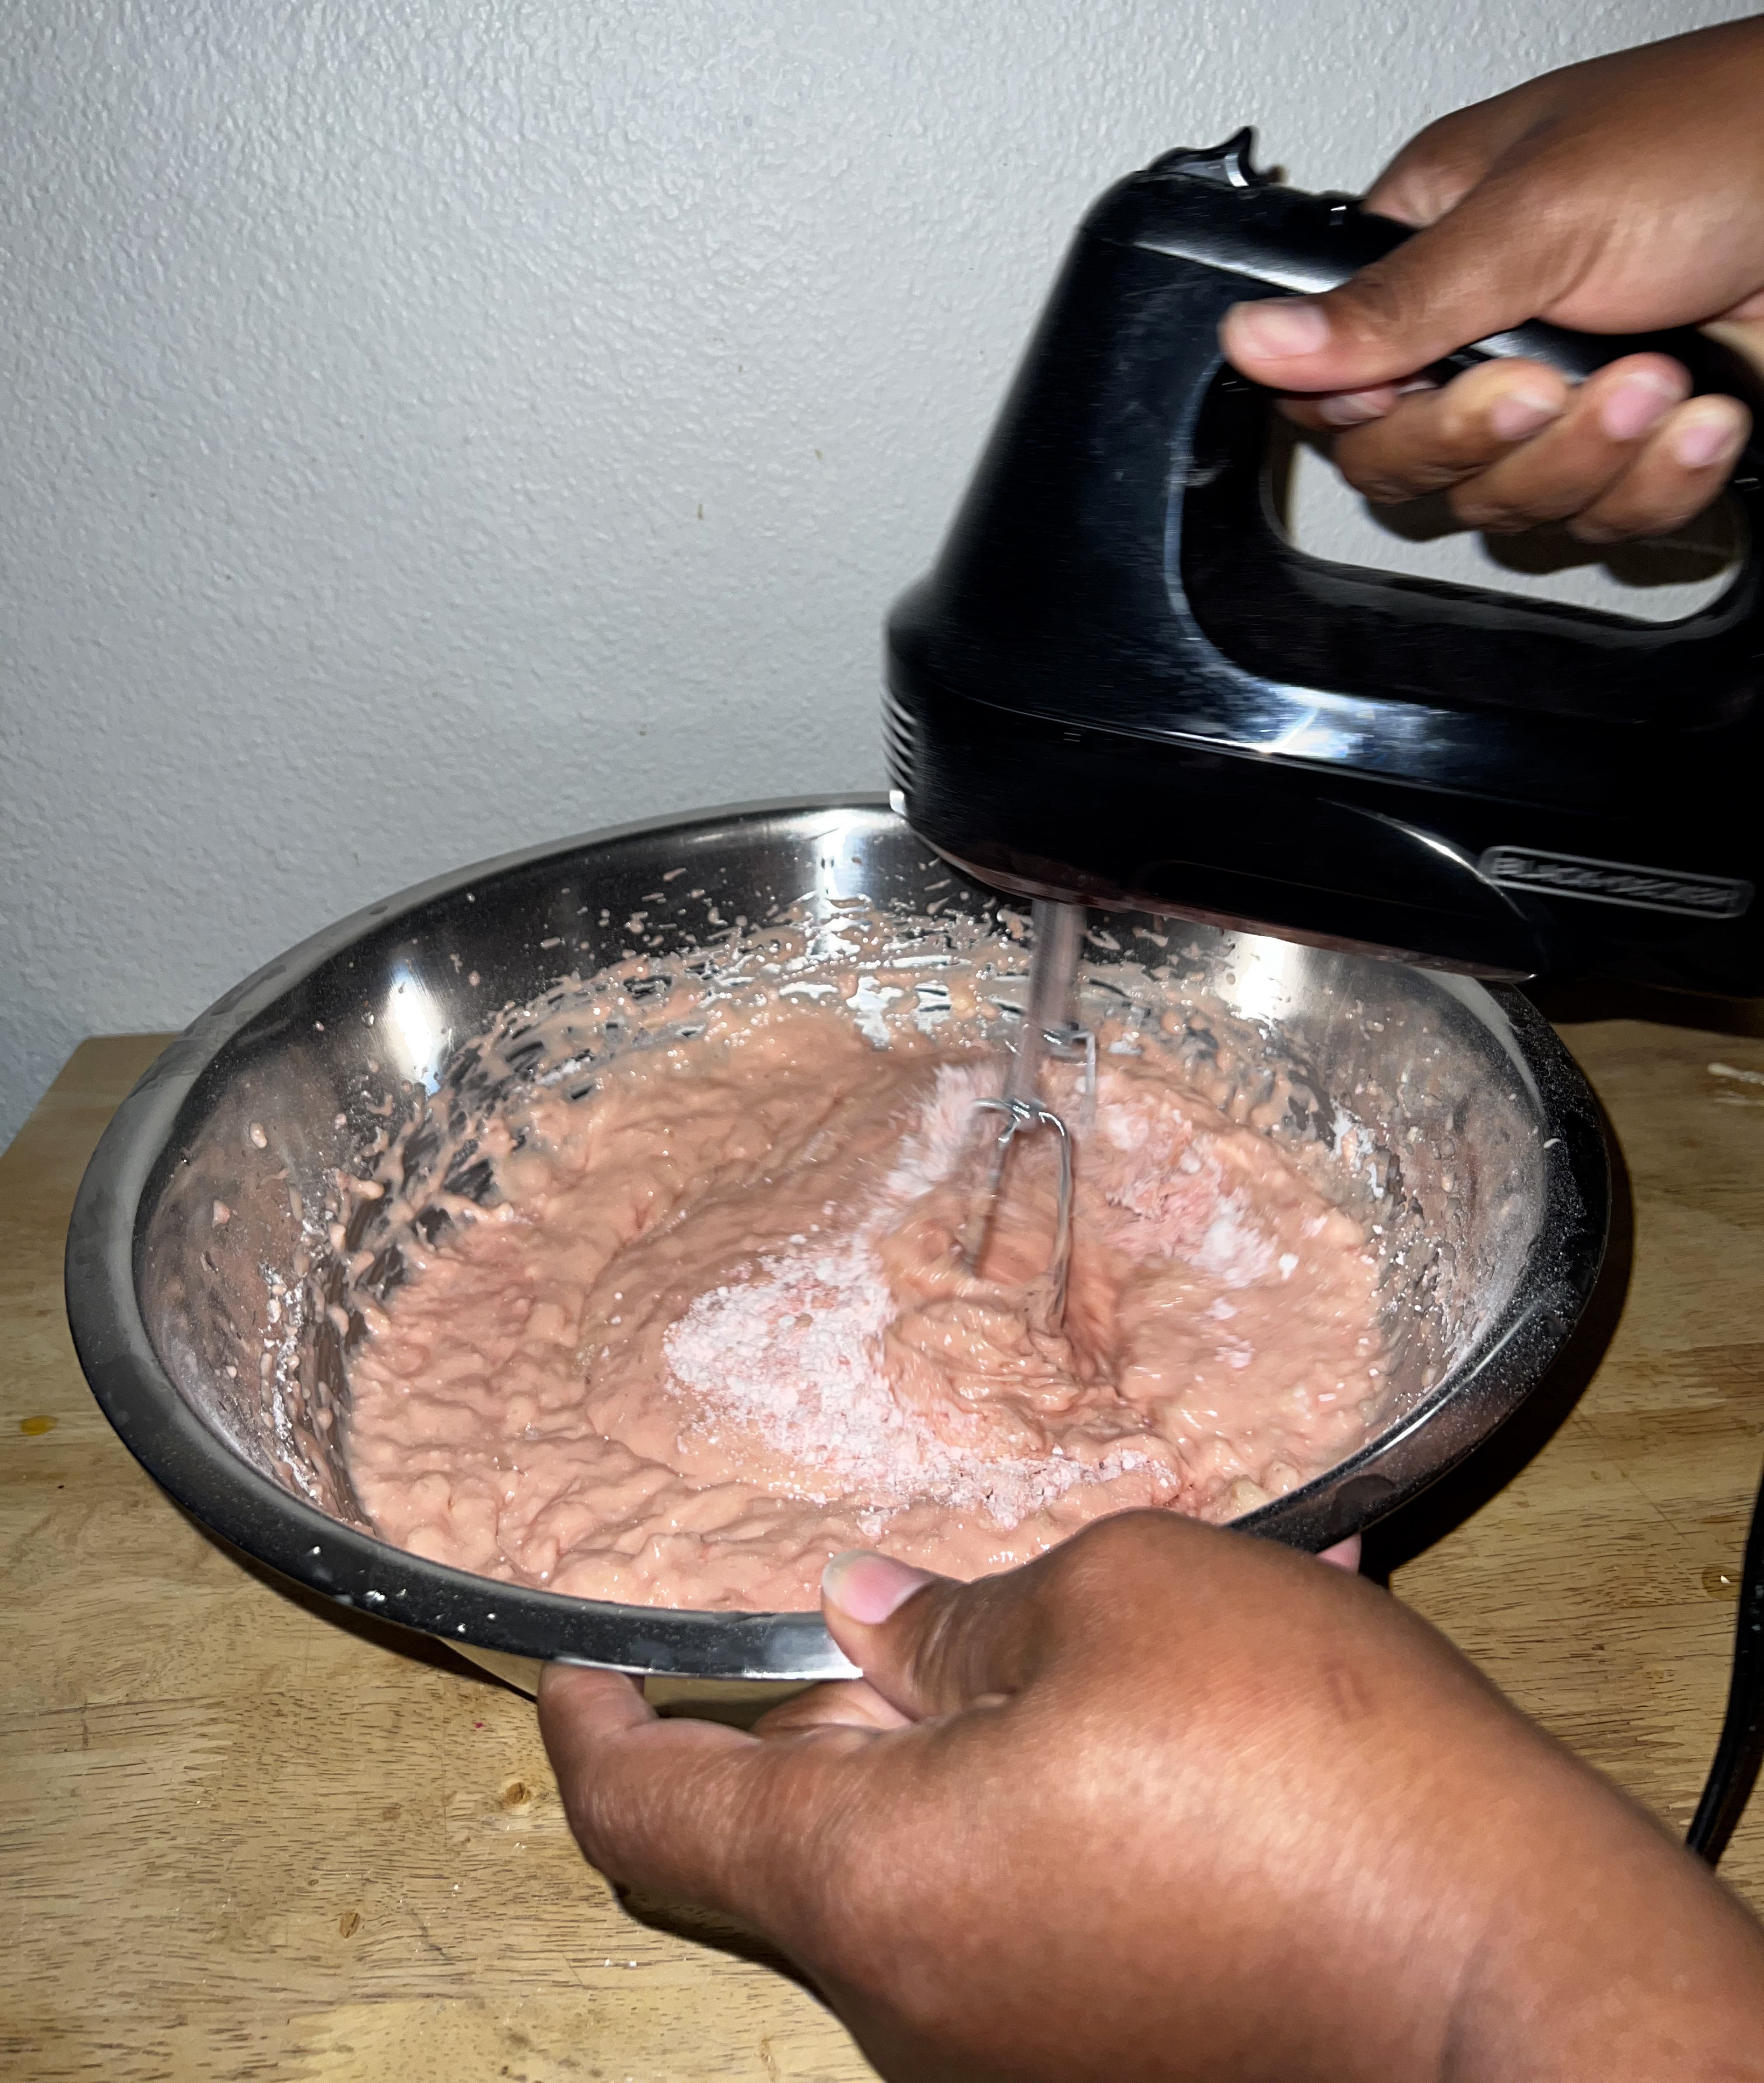 A picture of a hand blending strawberry cake mix with a blender.